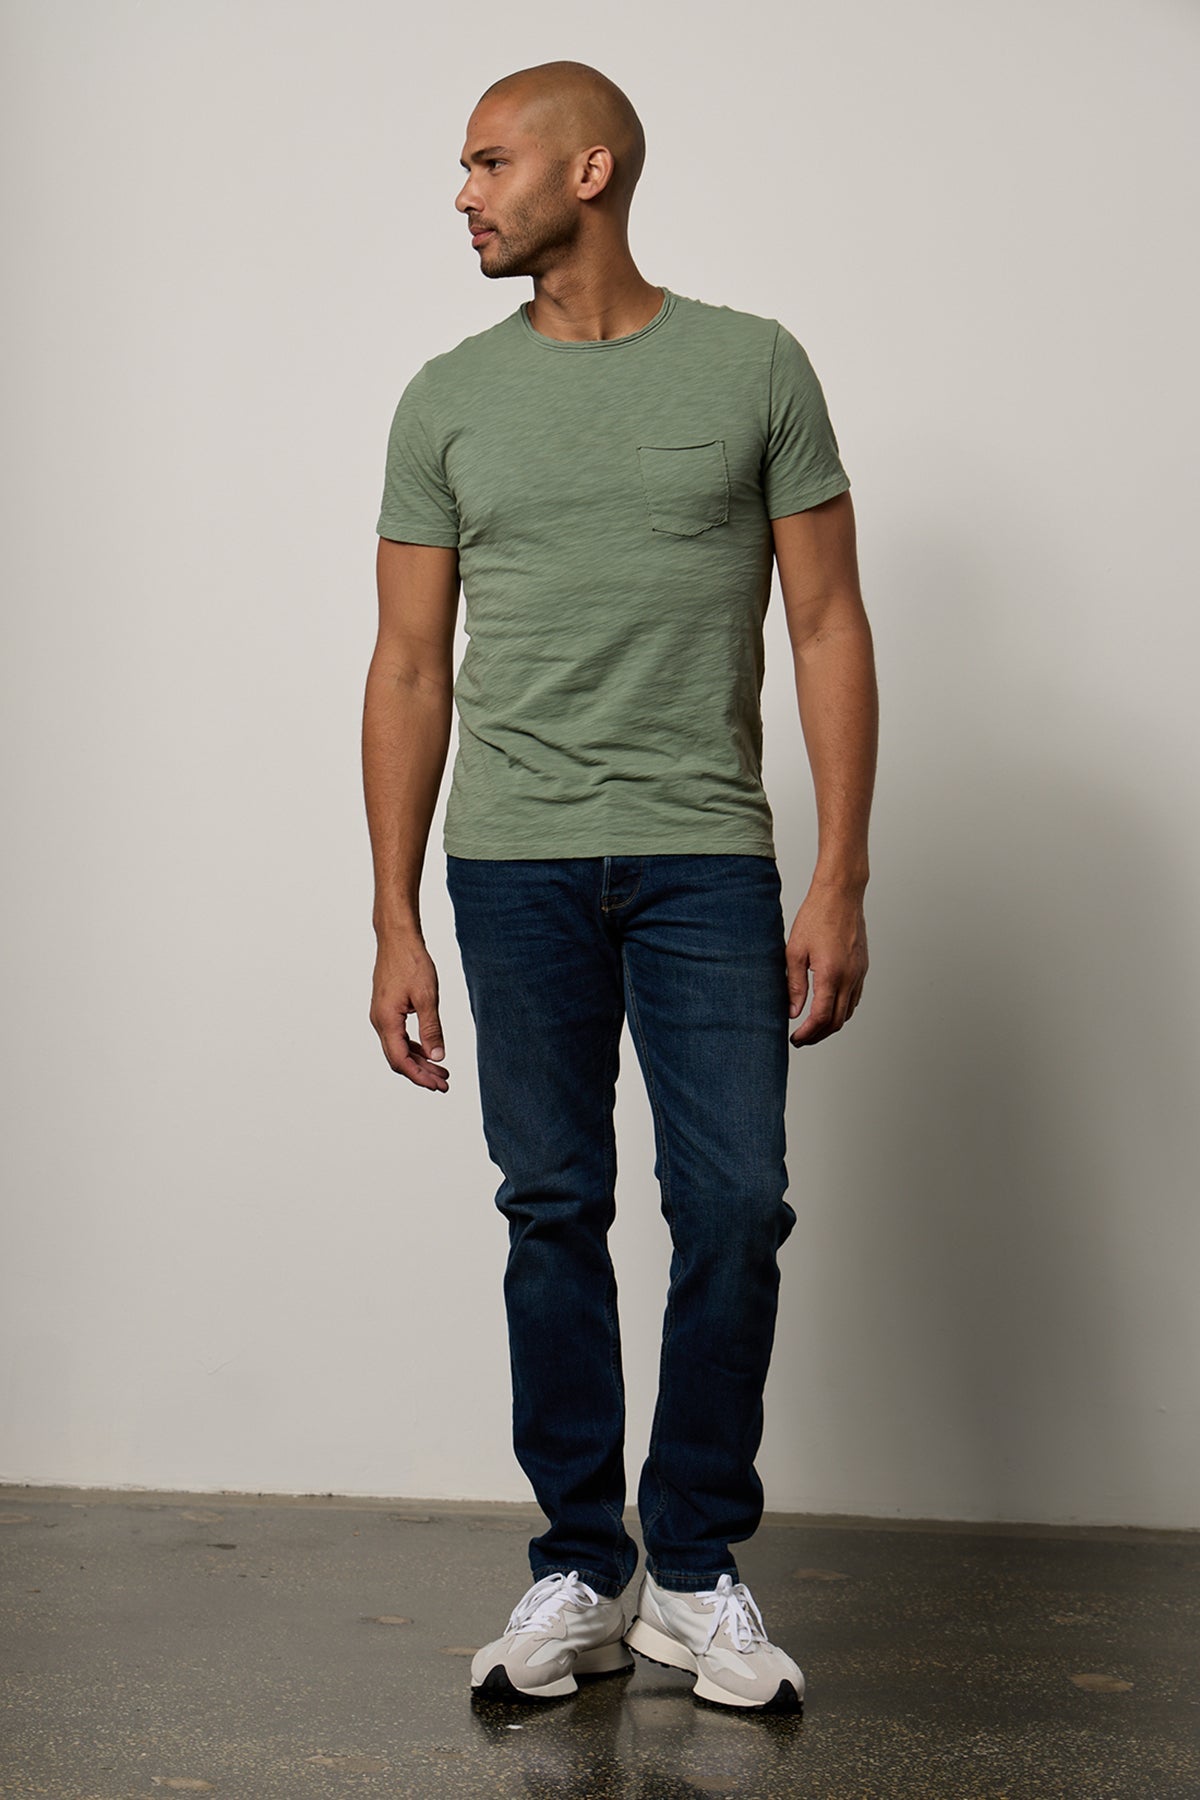   a man wearing jeans and a CHAD RAW EDGE COTTON SLUB POCKET TEE by Velvet by Graham & Spencer. 